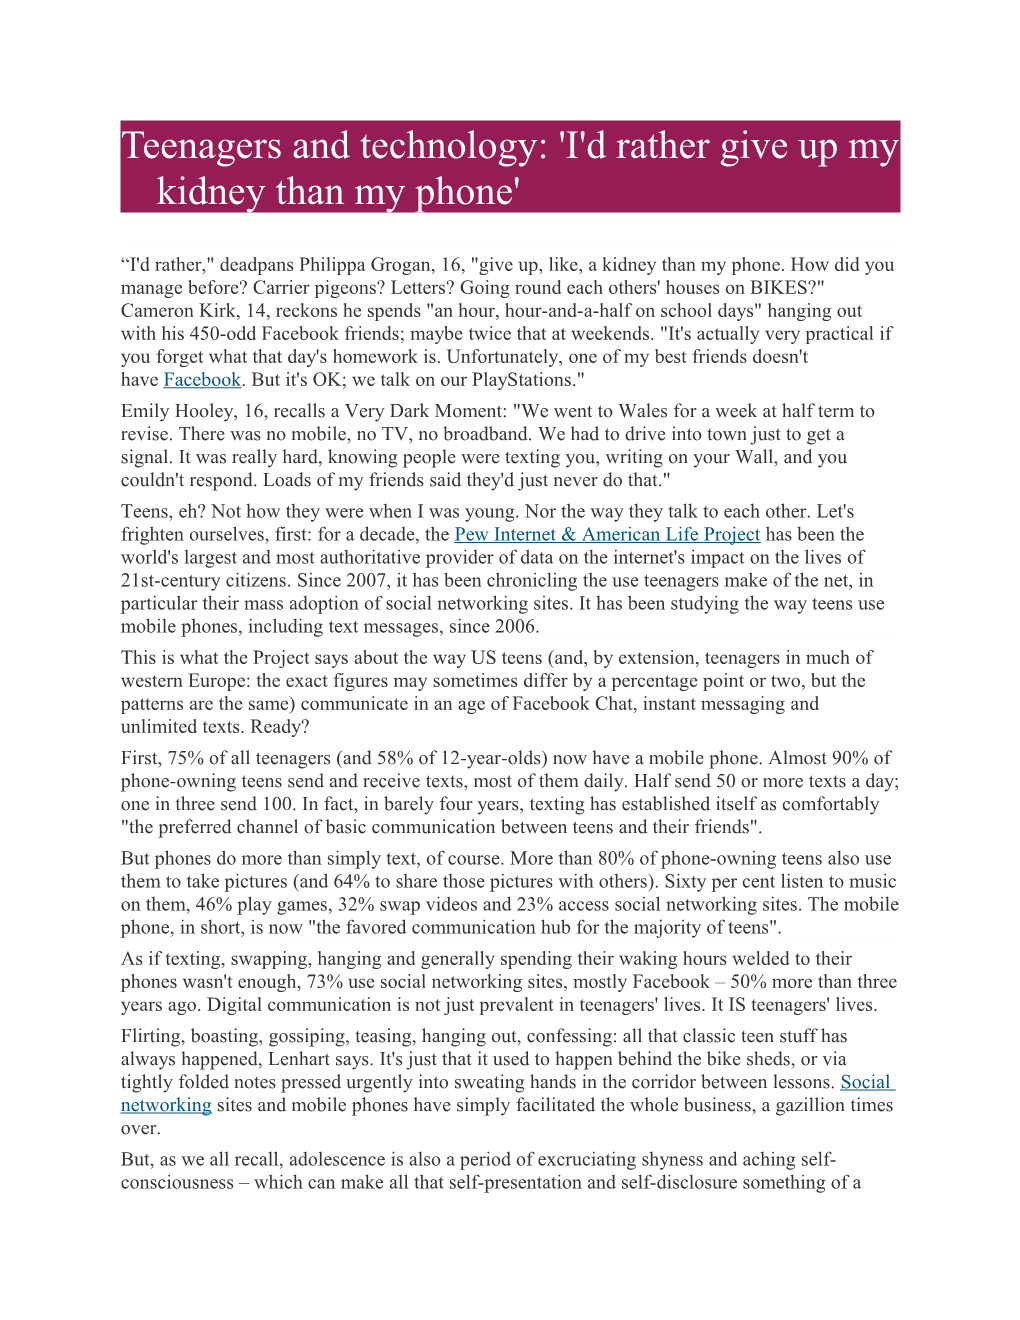 Teenagers and Technology: 'I'd Rather Give up My Kidney Than My Phone'